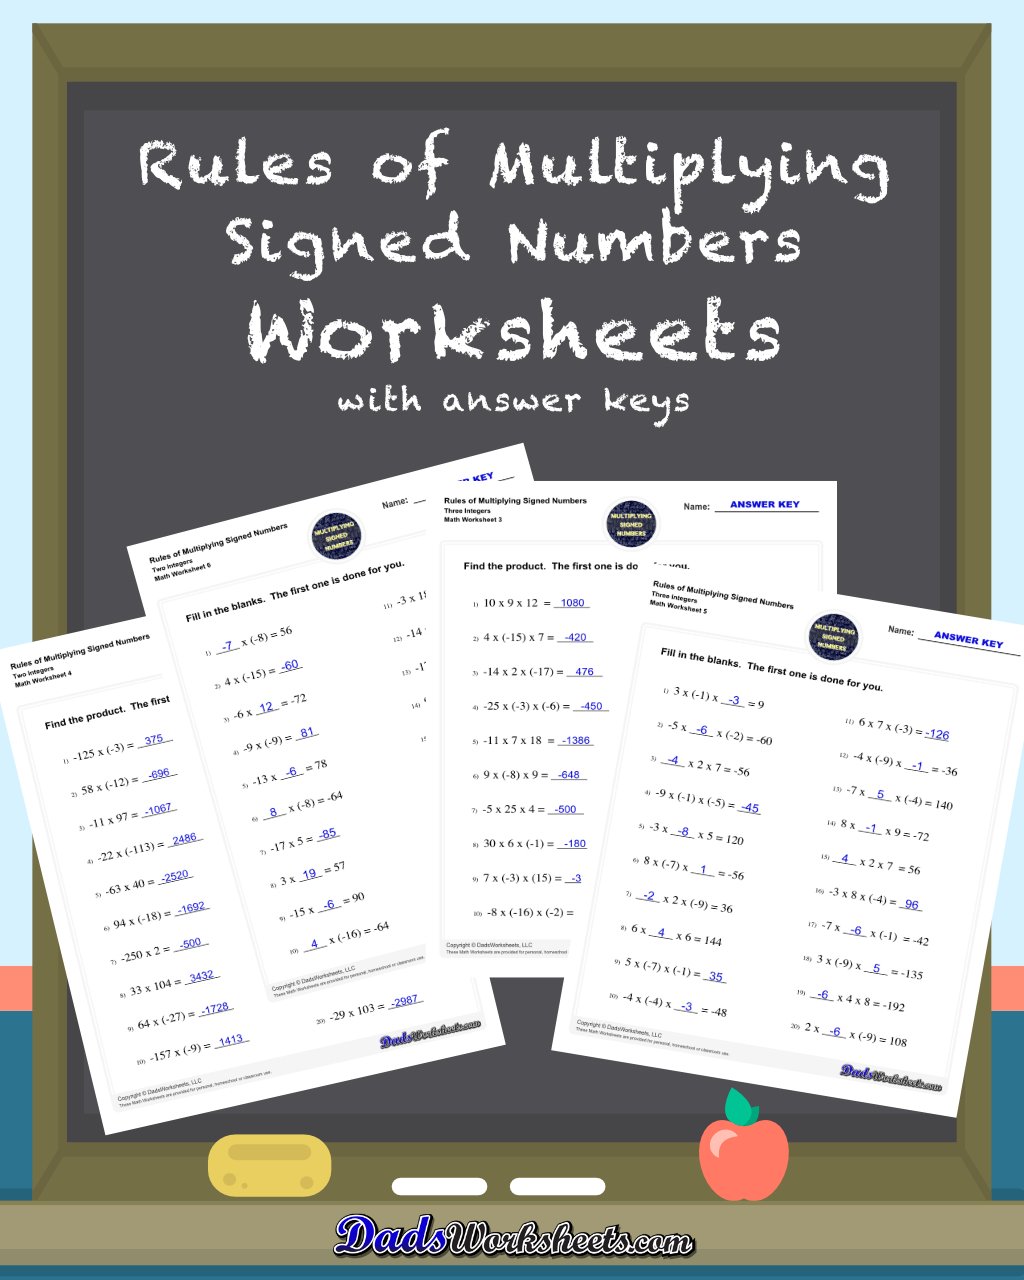 Rules of Multiplying Signed Numbers